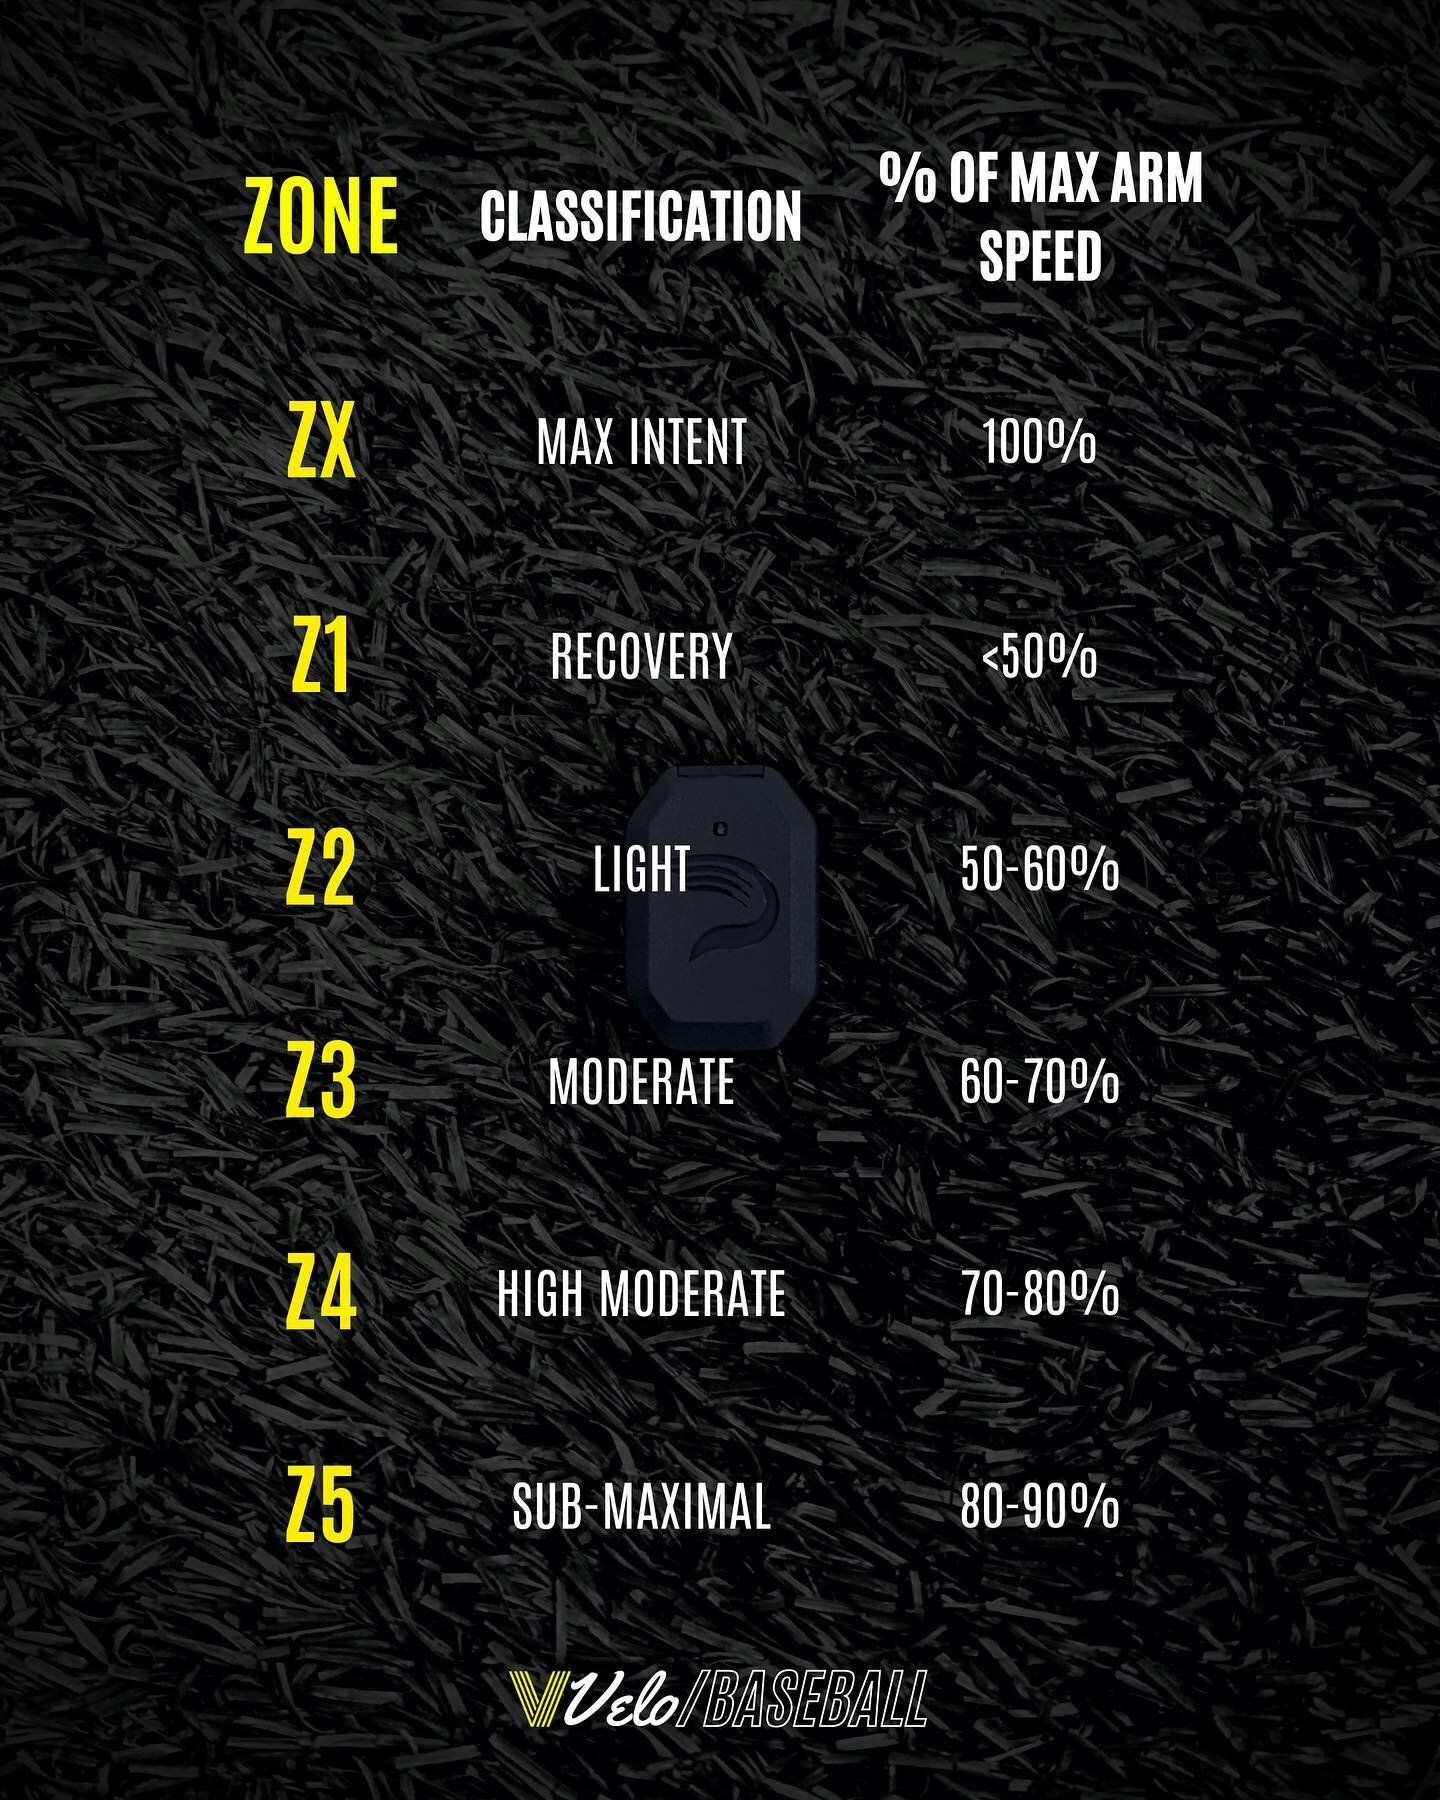 &ldquo;Zone-Based&rdquo; Arm Speed

We&rsquo;ve recently adopted a new approach to assigning throwing workouts. By leveraging @drivelinepulse we&rsquo;re able to regulate and measure the amount of arm stress an athlete accumulates within their throwi